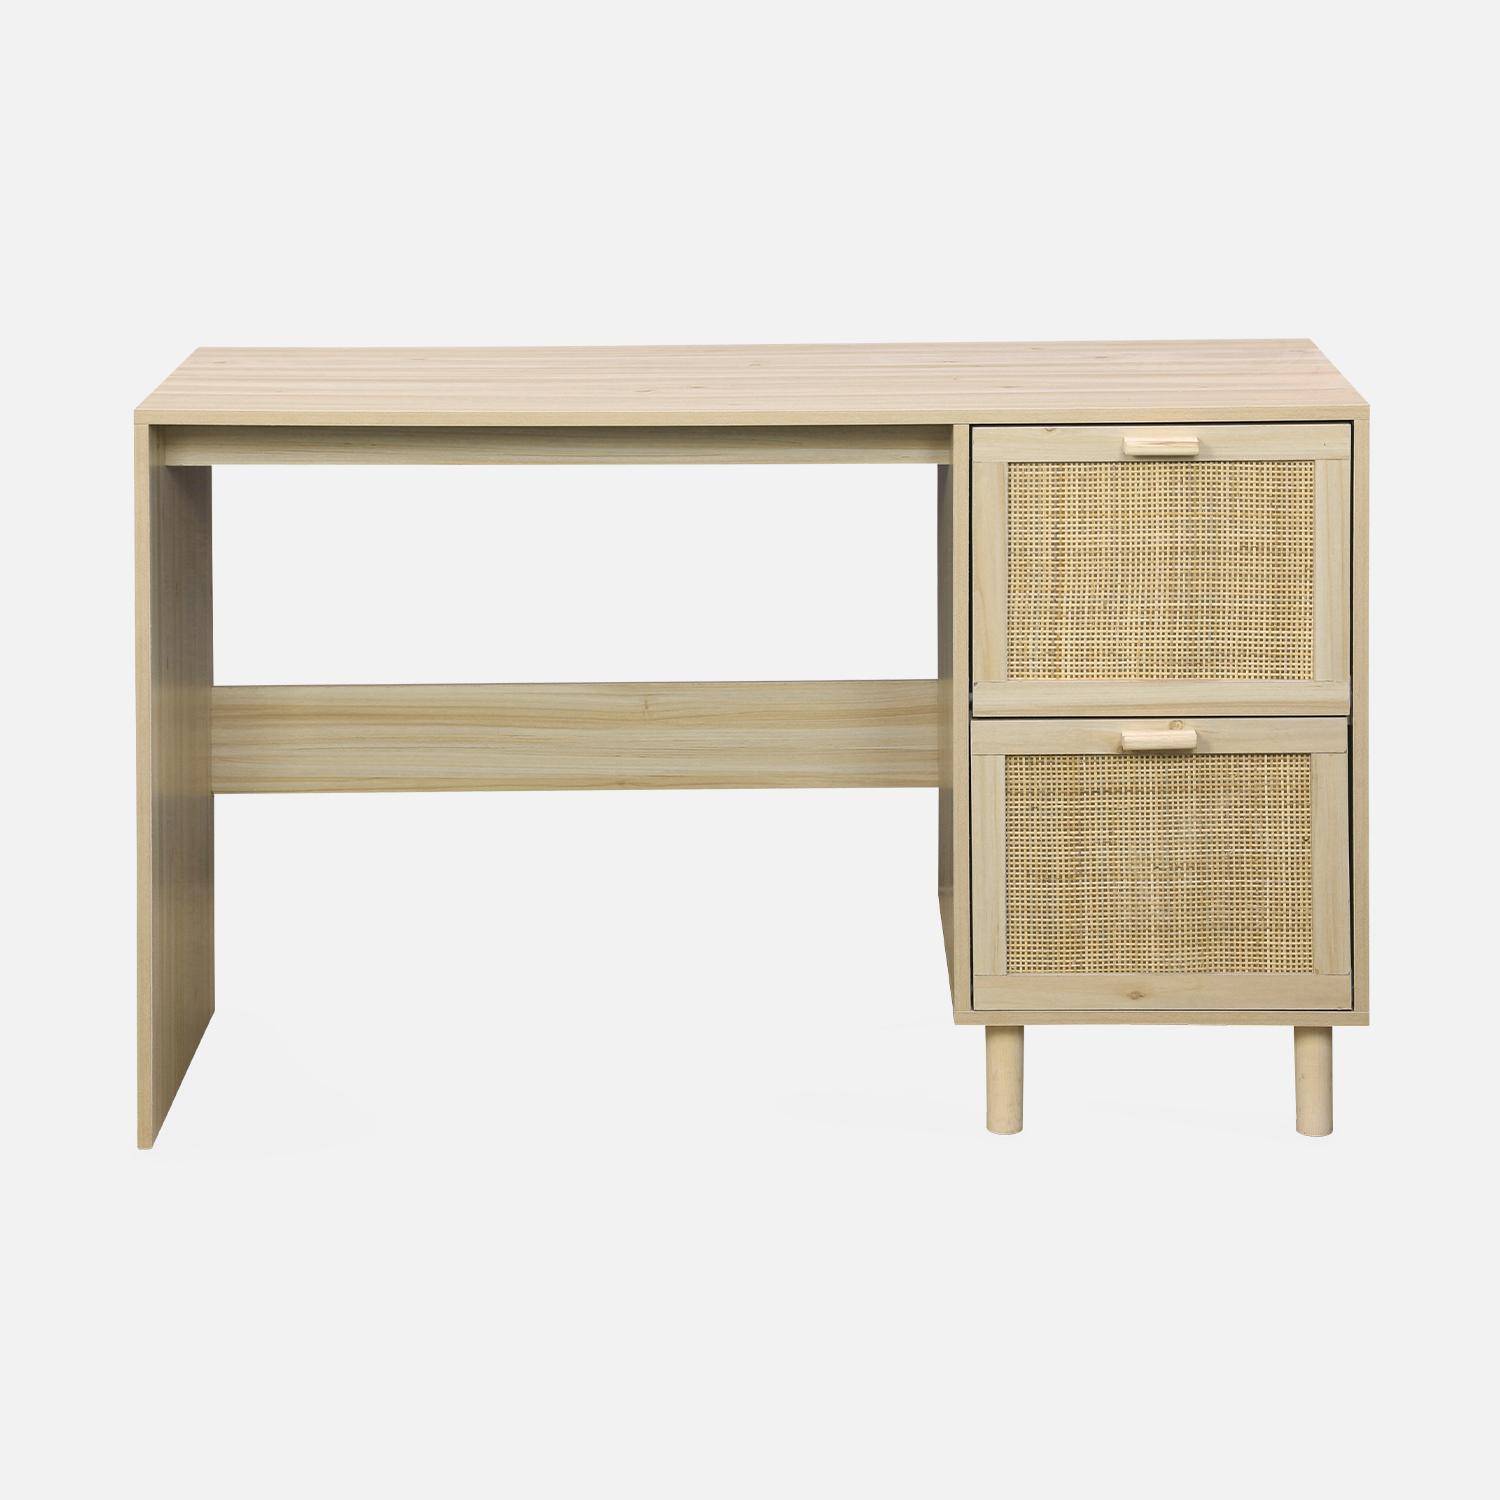 Woven rattan desk with 2 drawers, 120x48x75cm - Camargue - Natural,sweeek,Photo4